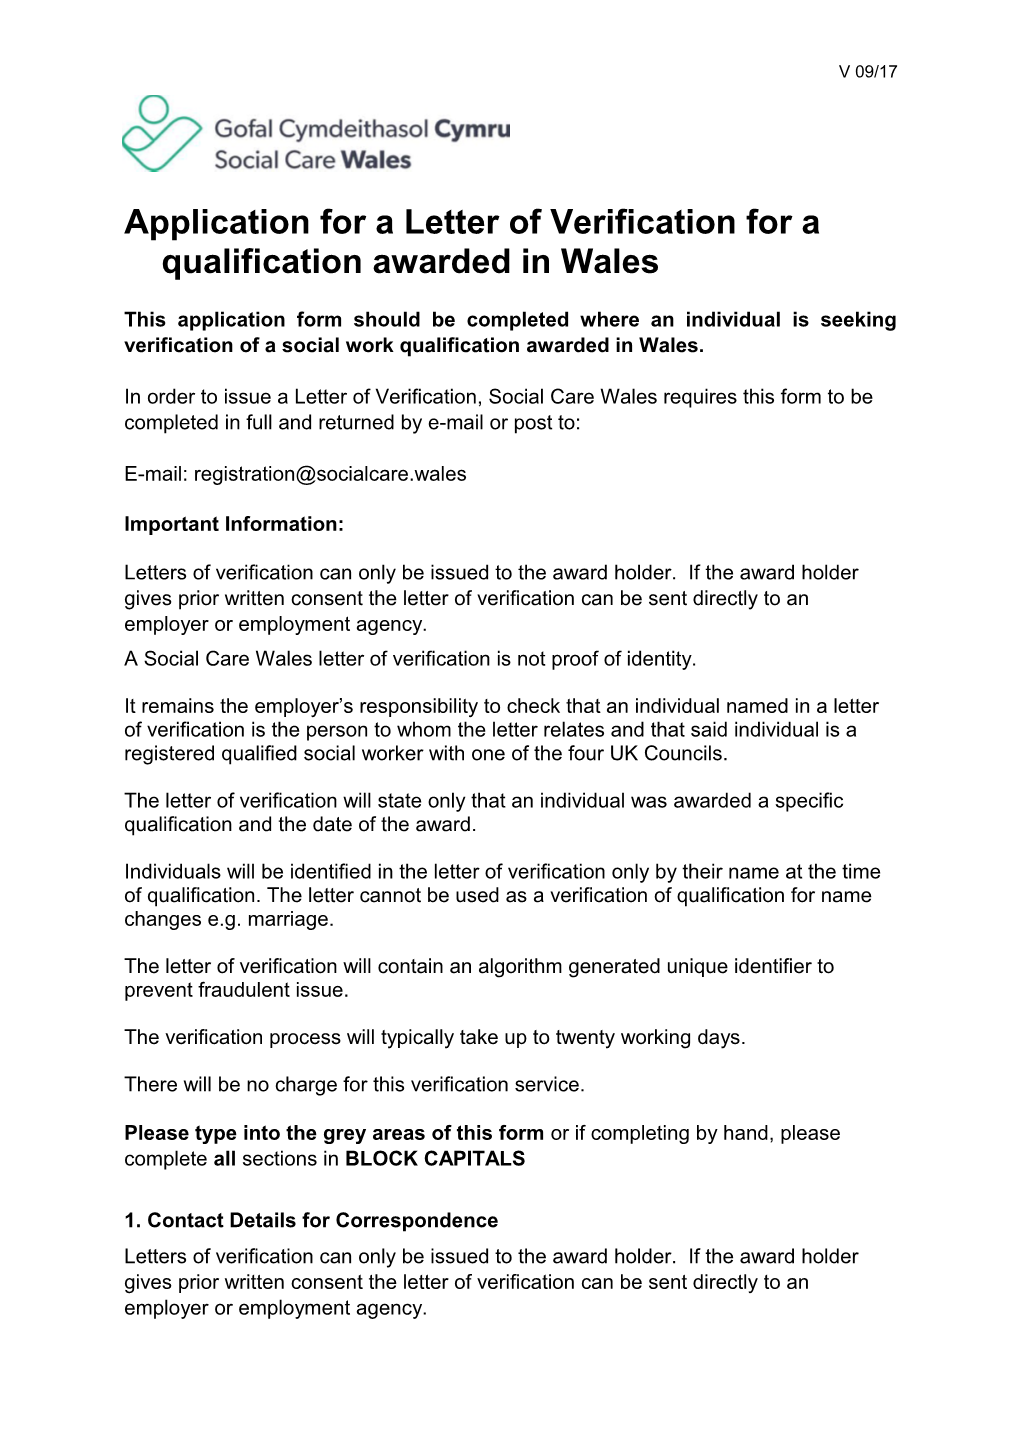 Application for a Letter of Verification for a Qualification Awarded in Wales